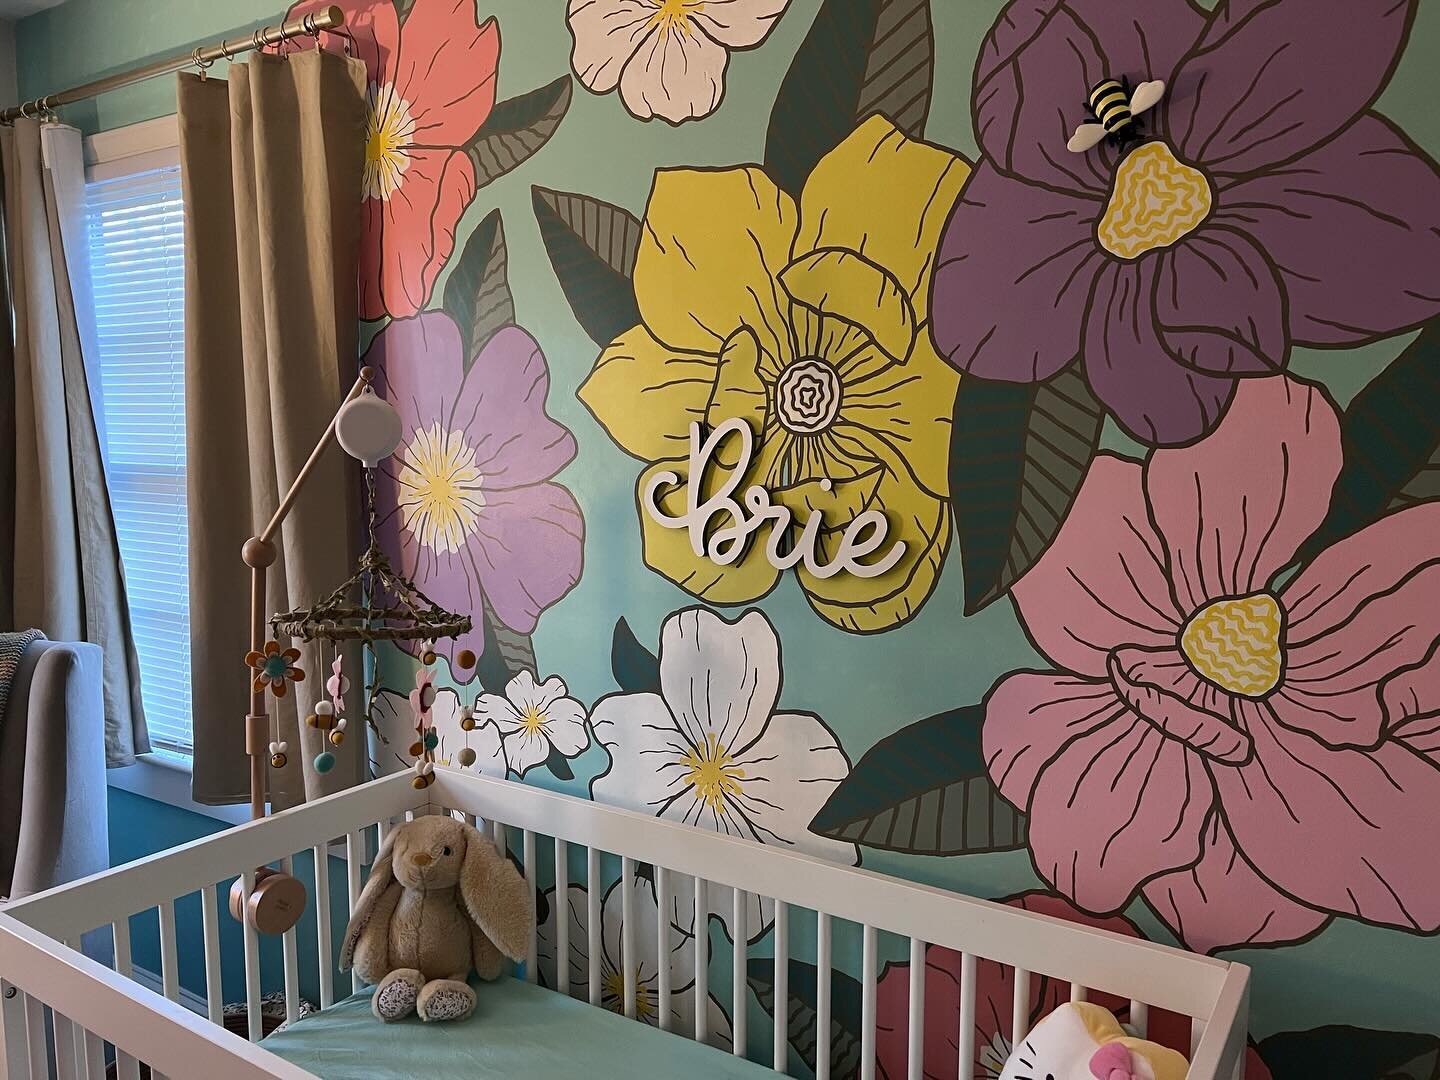 In April 2020 with nothing to do but Stay Home 🏠, I painted a flower 🌸 mural in my guest bedroom. (Swipe to see last pic!) Fast forward to 2023 and I gave the mural a refresh for my daughter&rsquo;s nursery 👶🏻! Complete with a custom name sign my